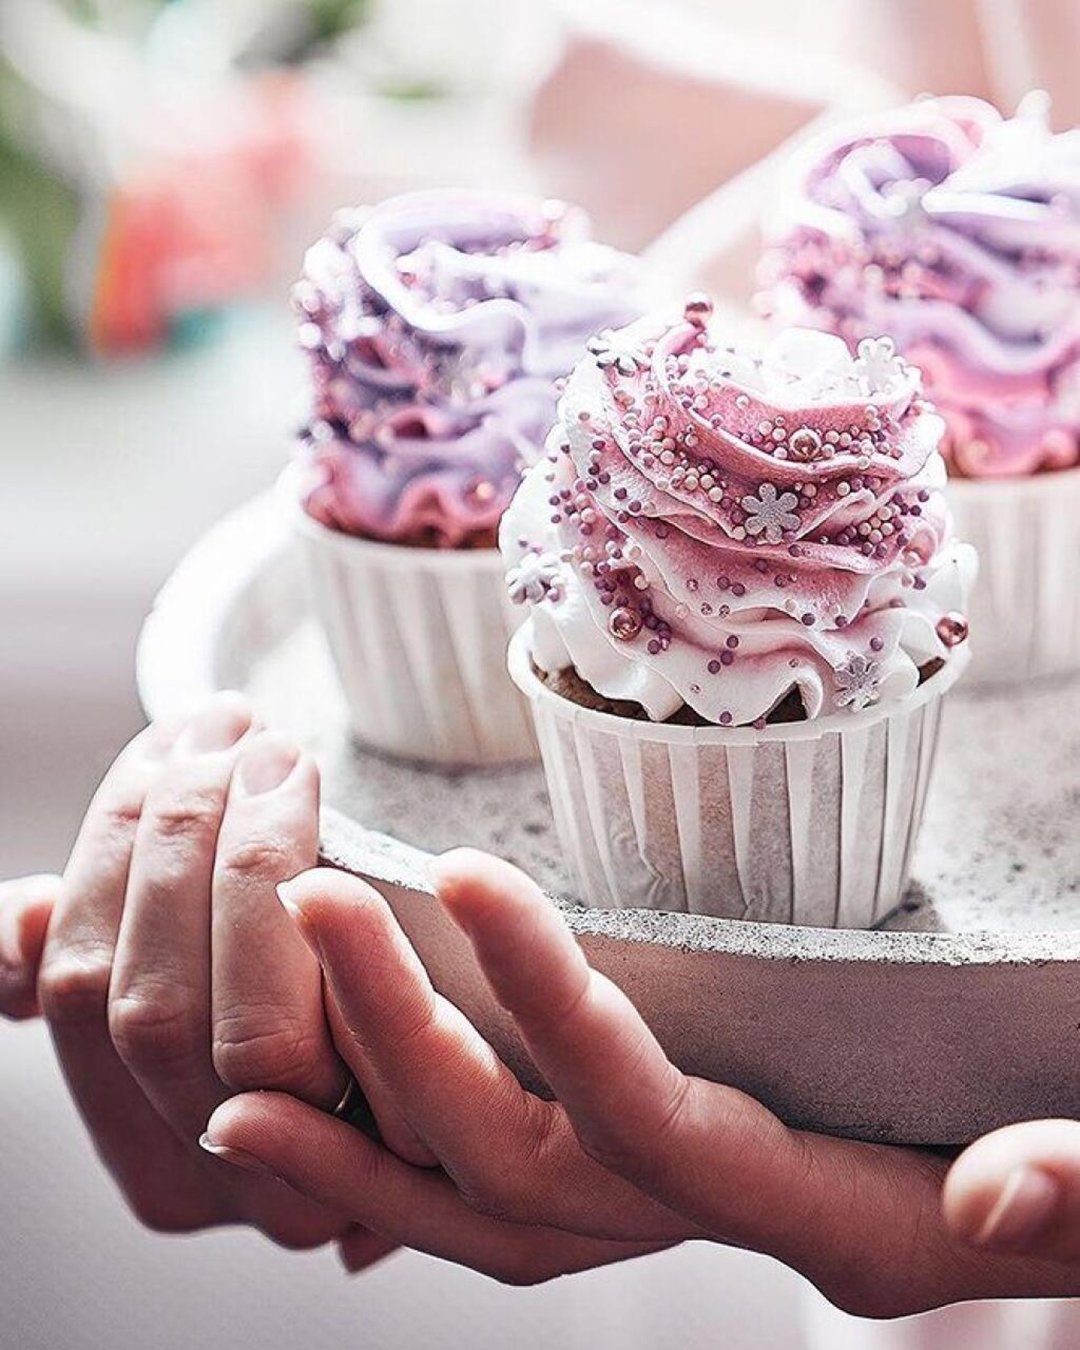 unique wedding cupcake ideas pink ombre cream with small flowers annabel bakery